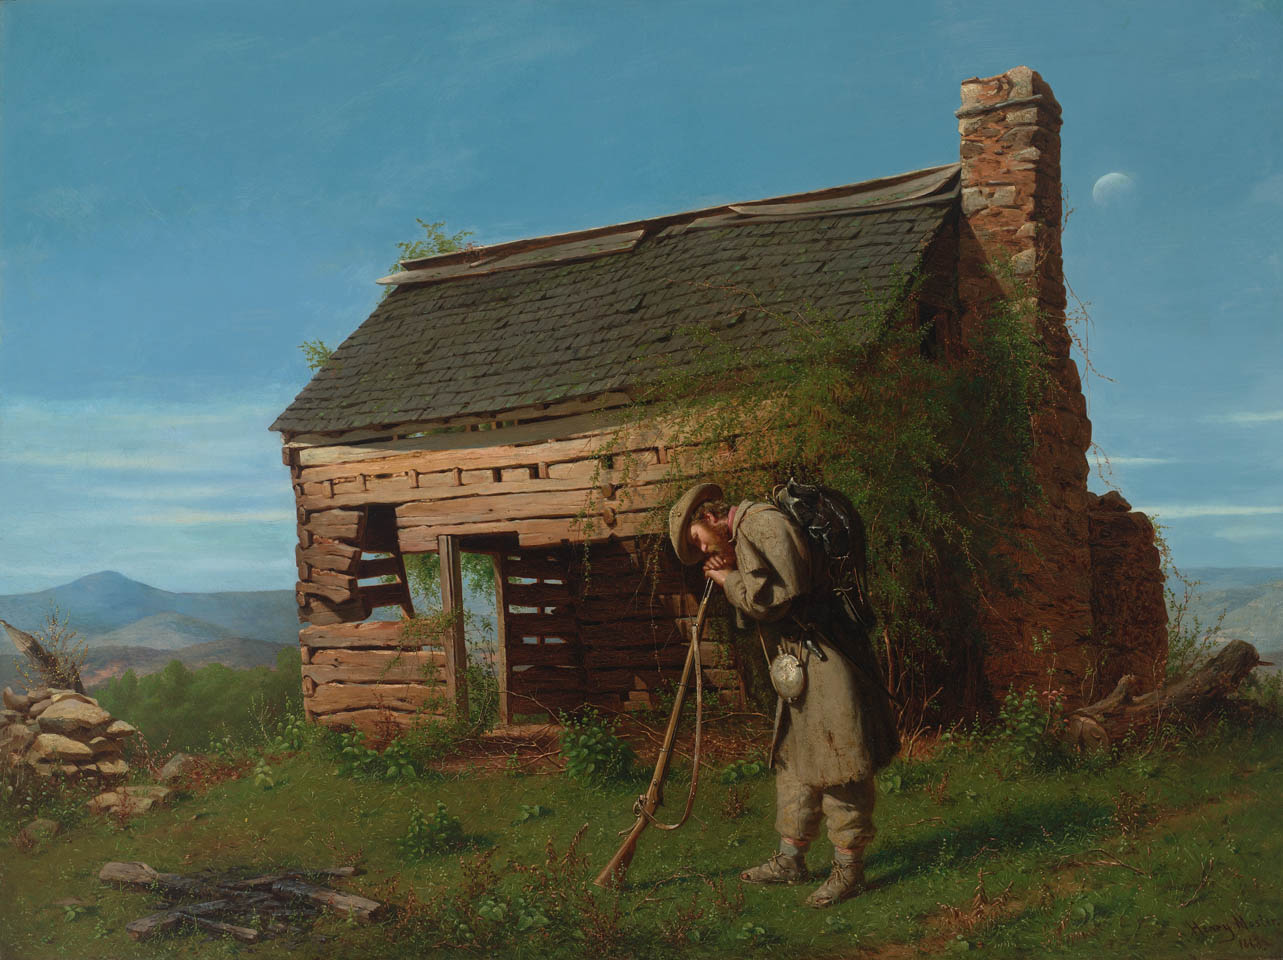 Henry Mosler, <em>The Lost Cause</em>, 1868, oil on canvas, 91.44 cm x 121.92 cm (<a href="https://thejohnsoncollection.org/henry-mosler/" target="_blank" rel="noopener">The Johnson Collection</a>)